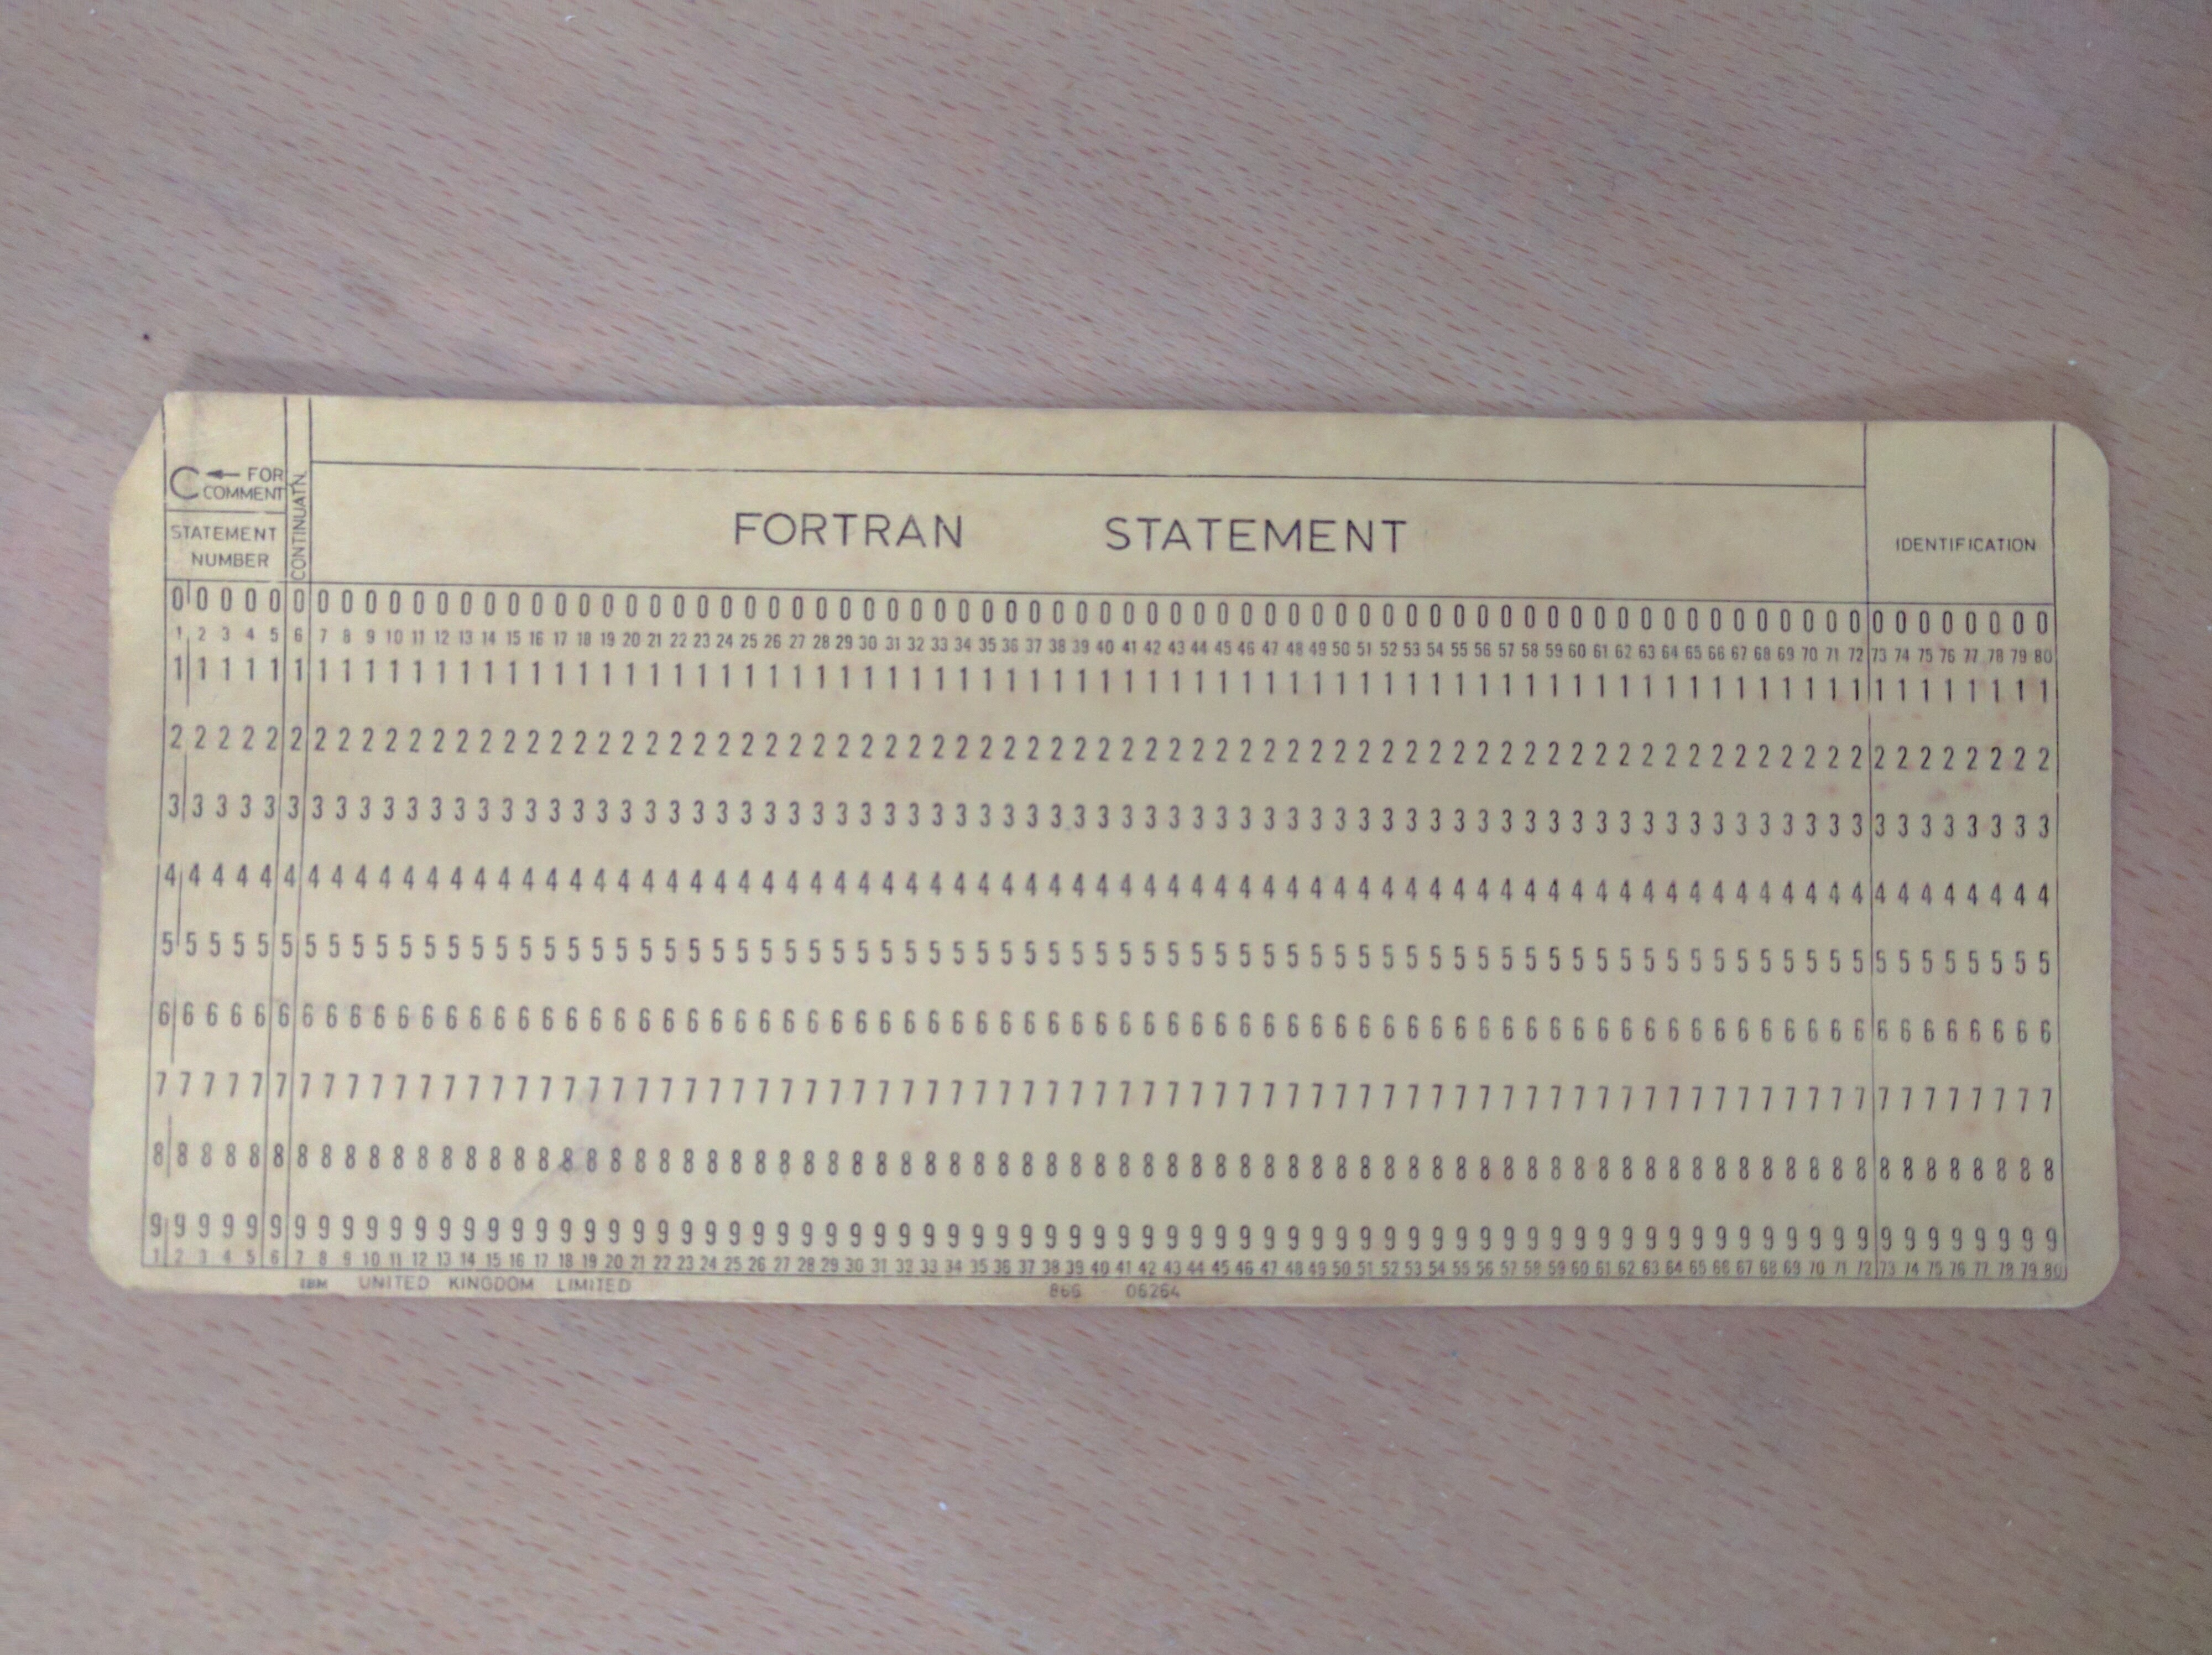 80 column punched card